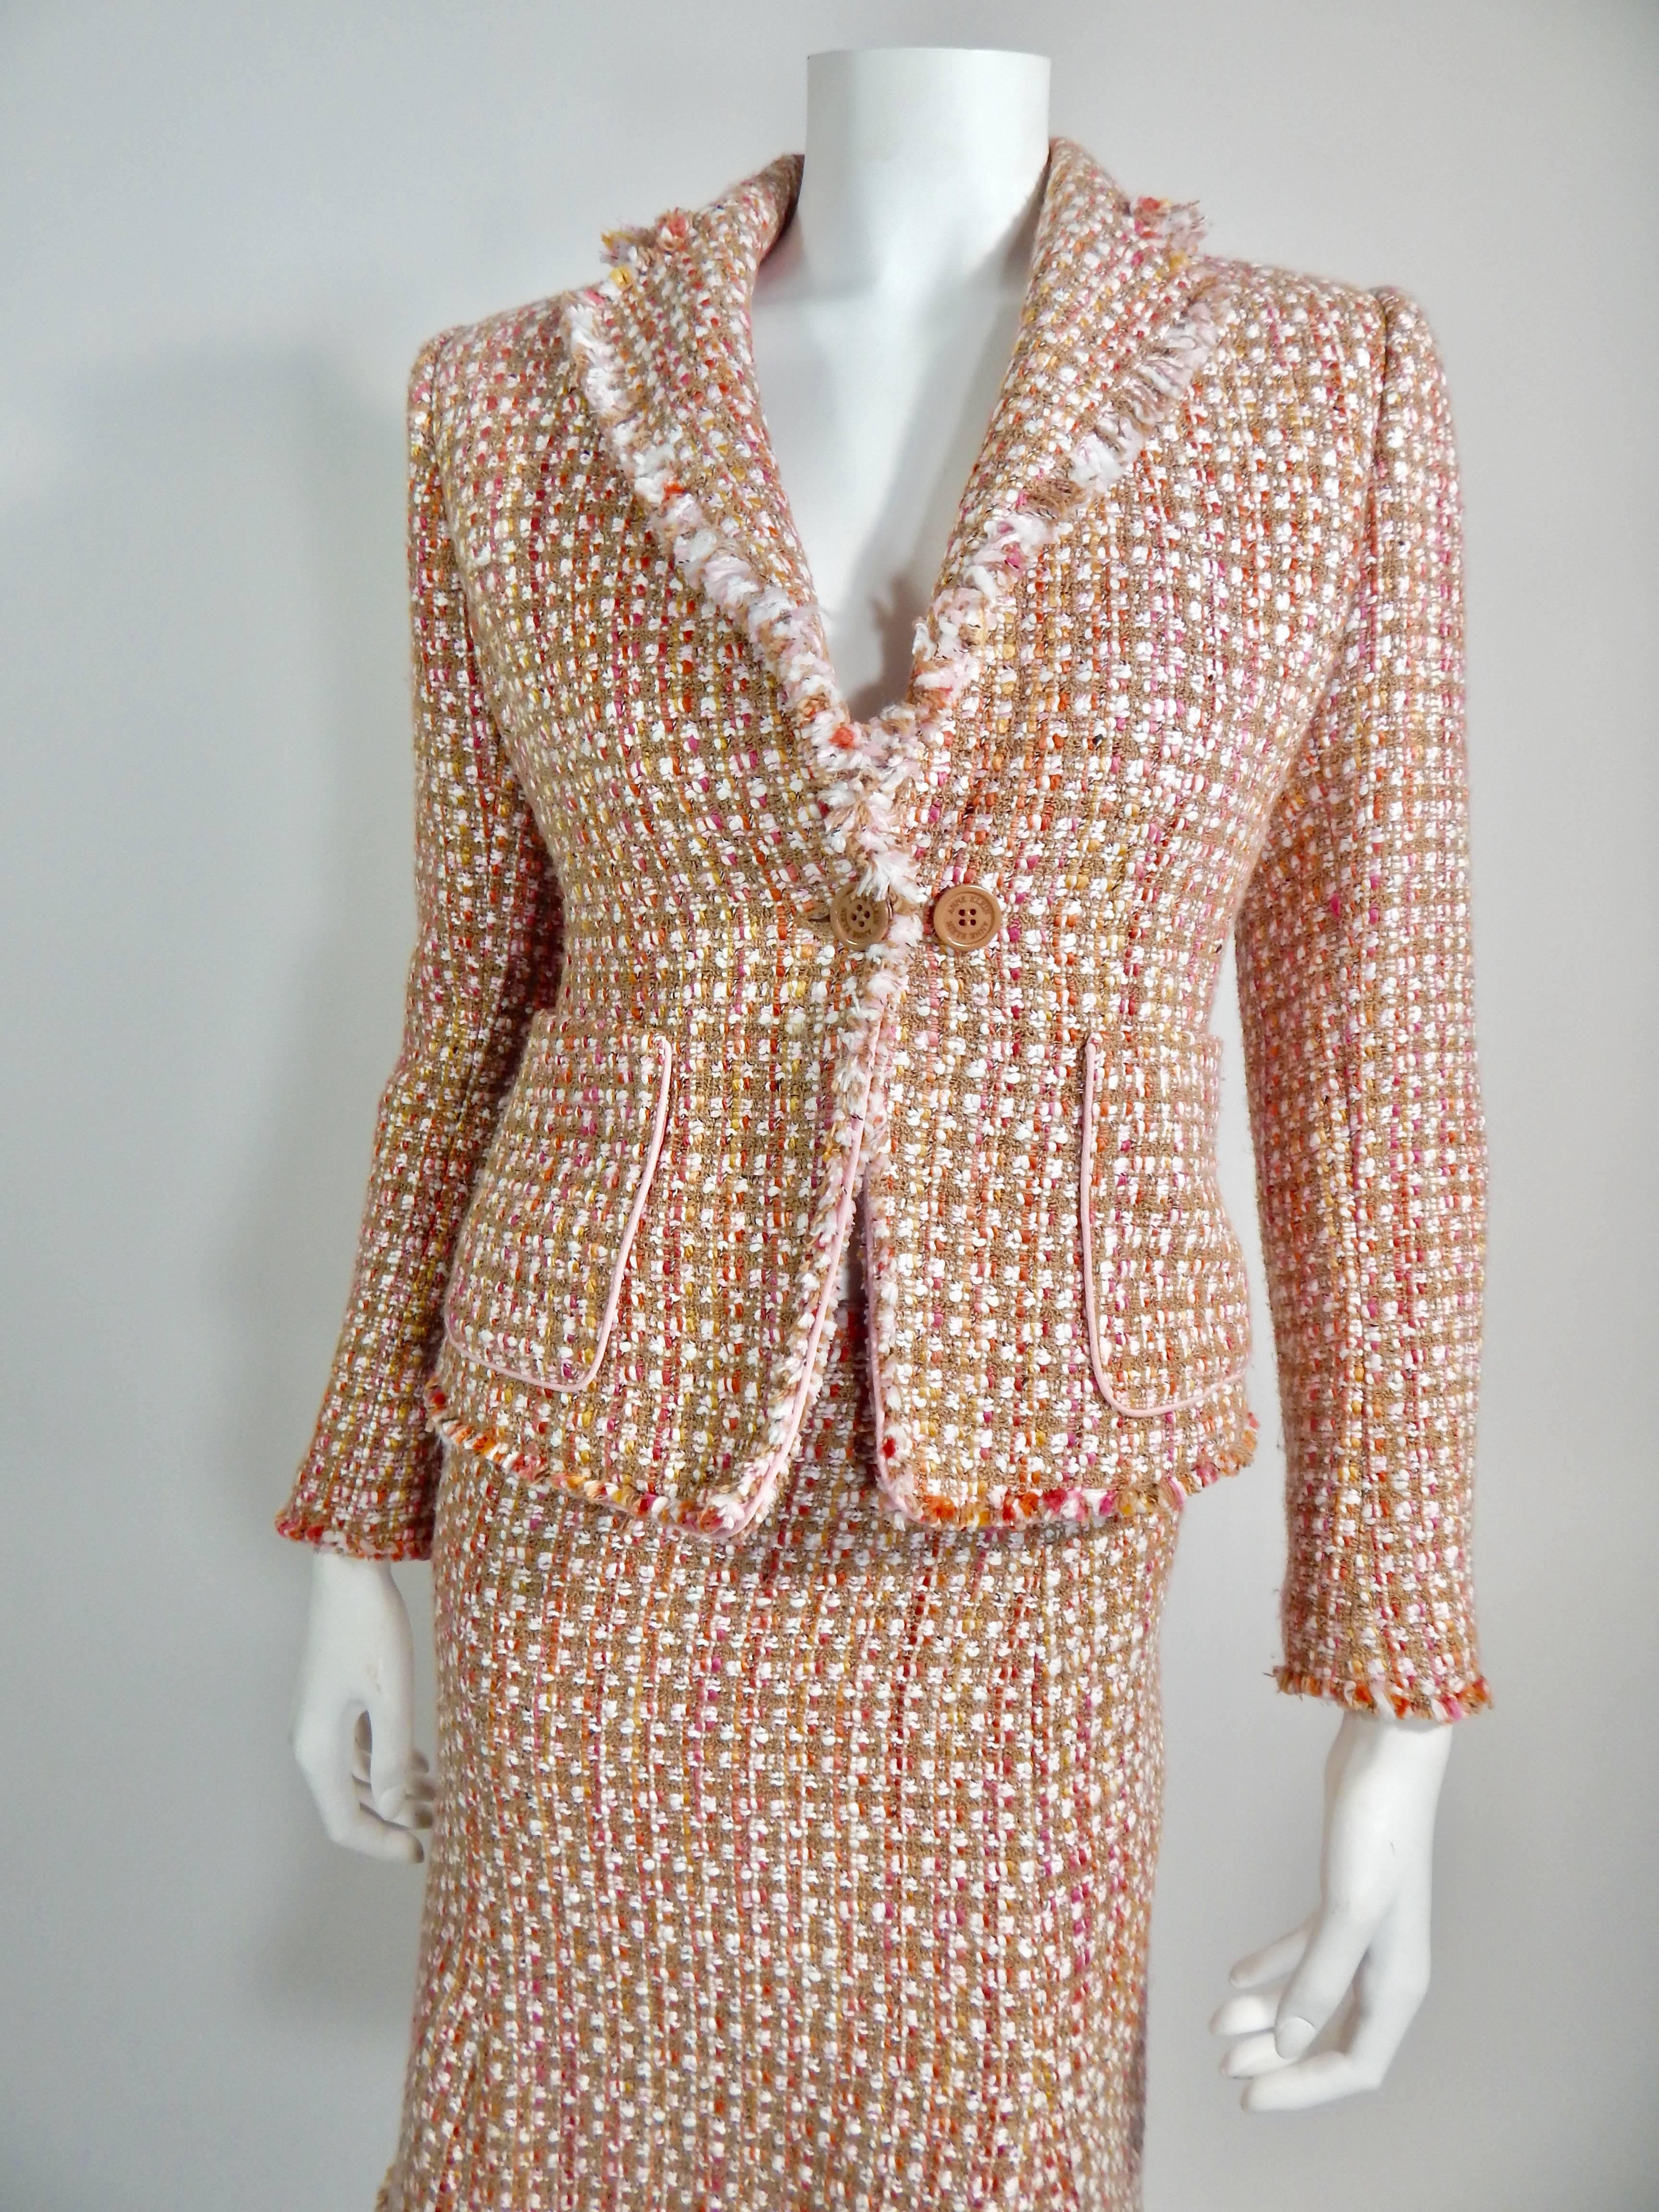 Anne Klein Suit with Skirt and Jacket / Blazer.  Tweed, pink, tan and white. Tan button closure on and front pockets on jacket. Zipper on skirt. Both jacket and skirt fully lined. Size 2.
